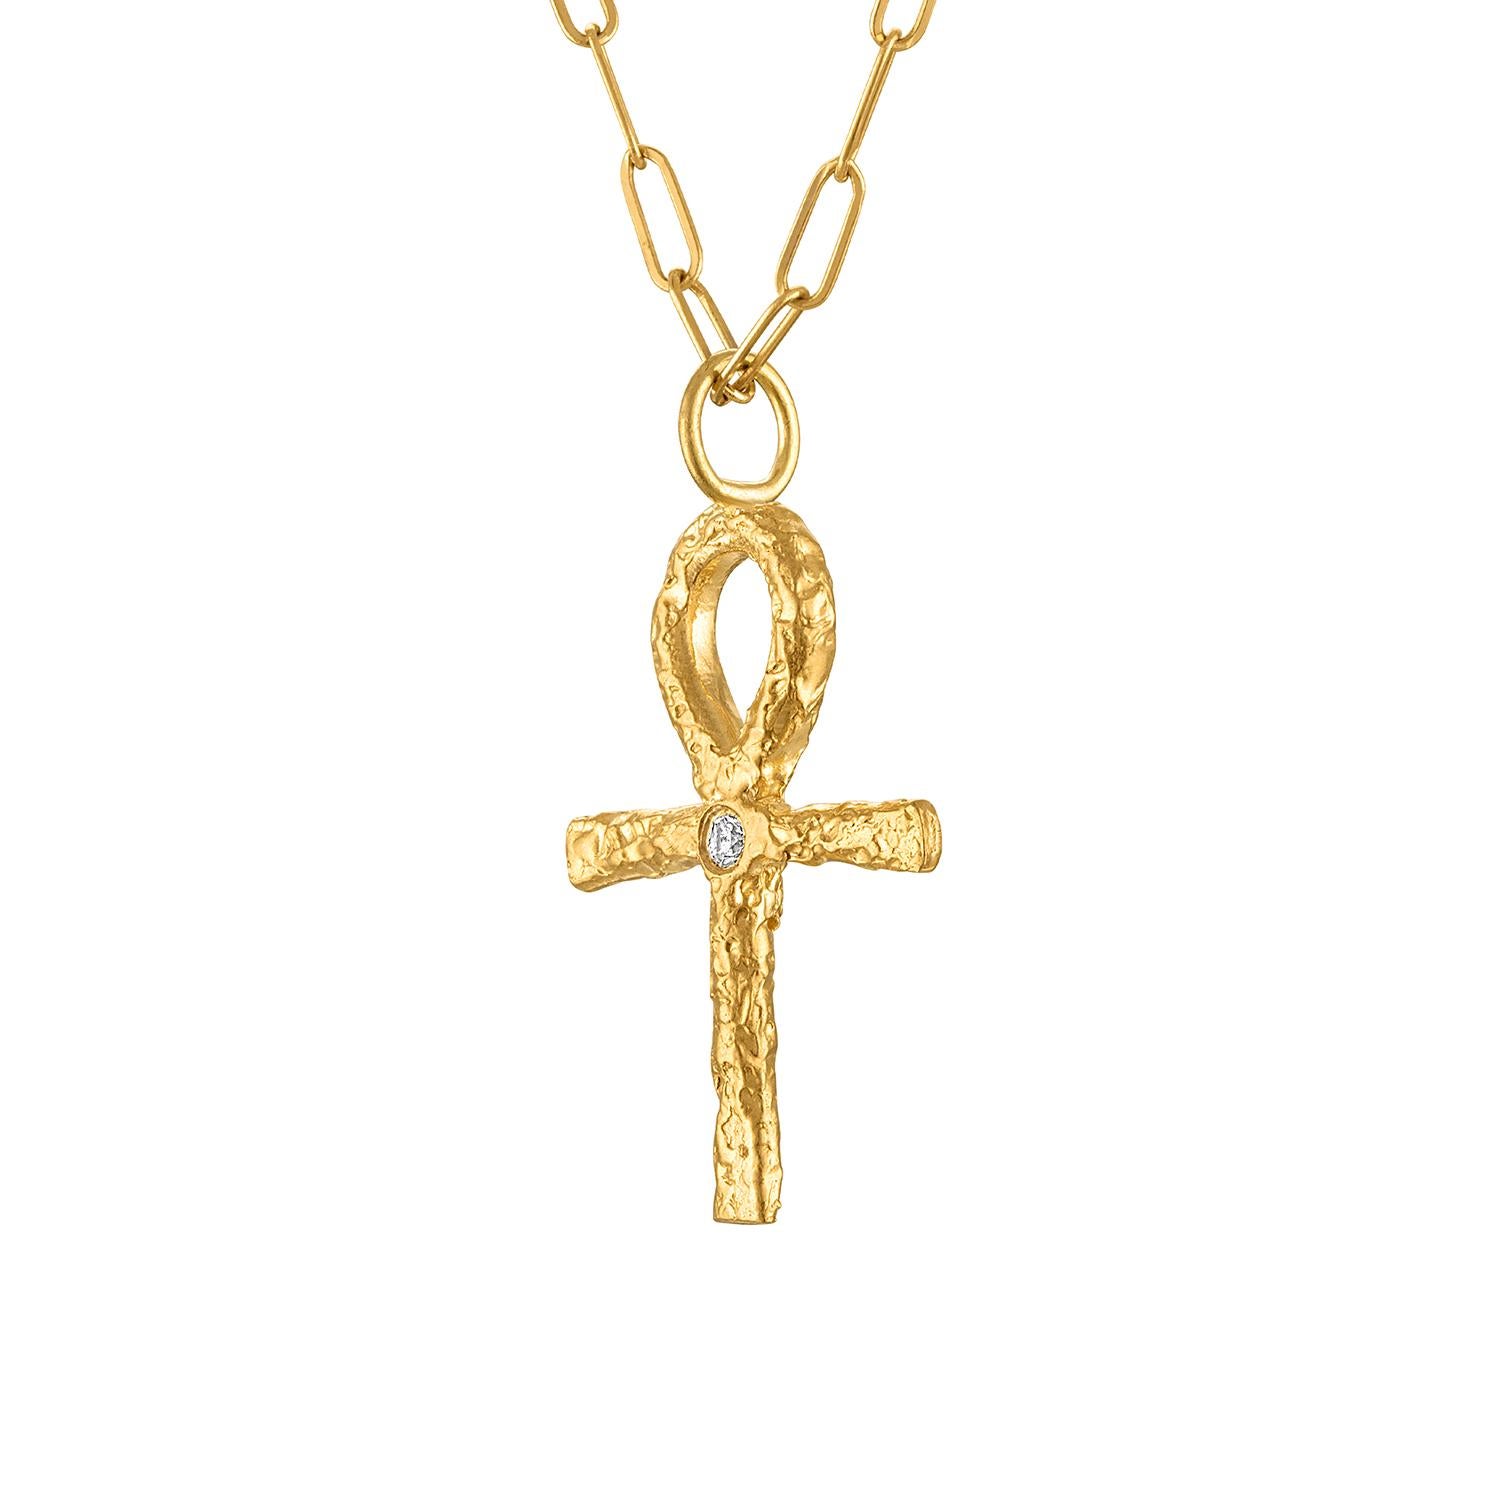 Round Cut The Mini Ankh Pendant in 22k gold For Sale